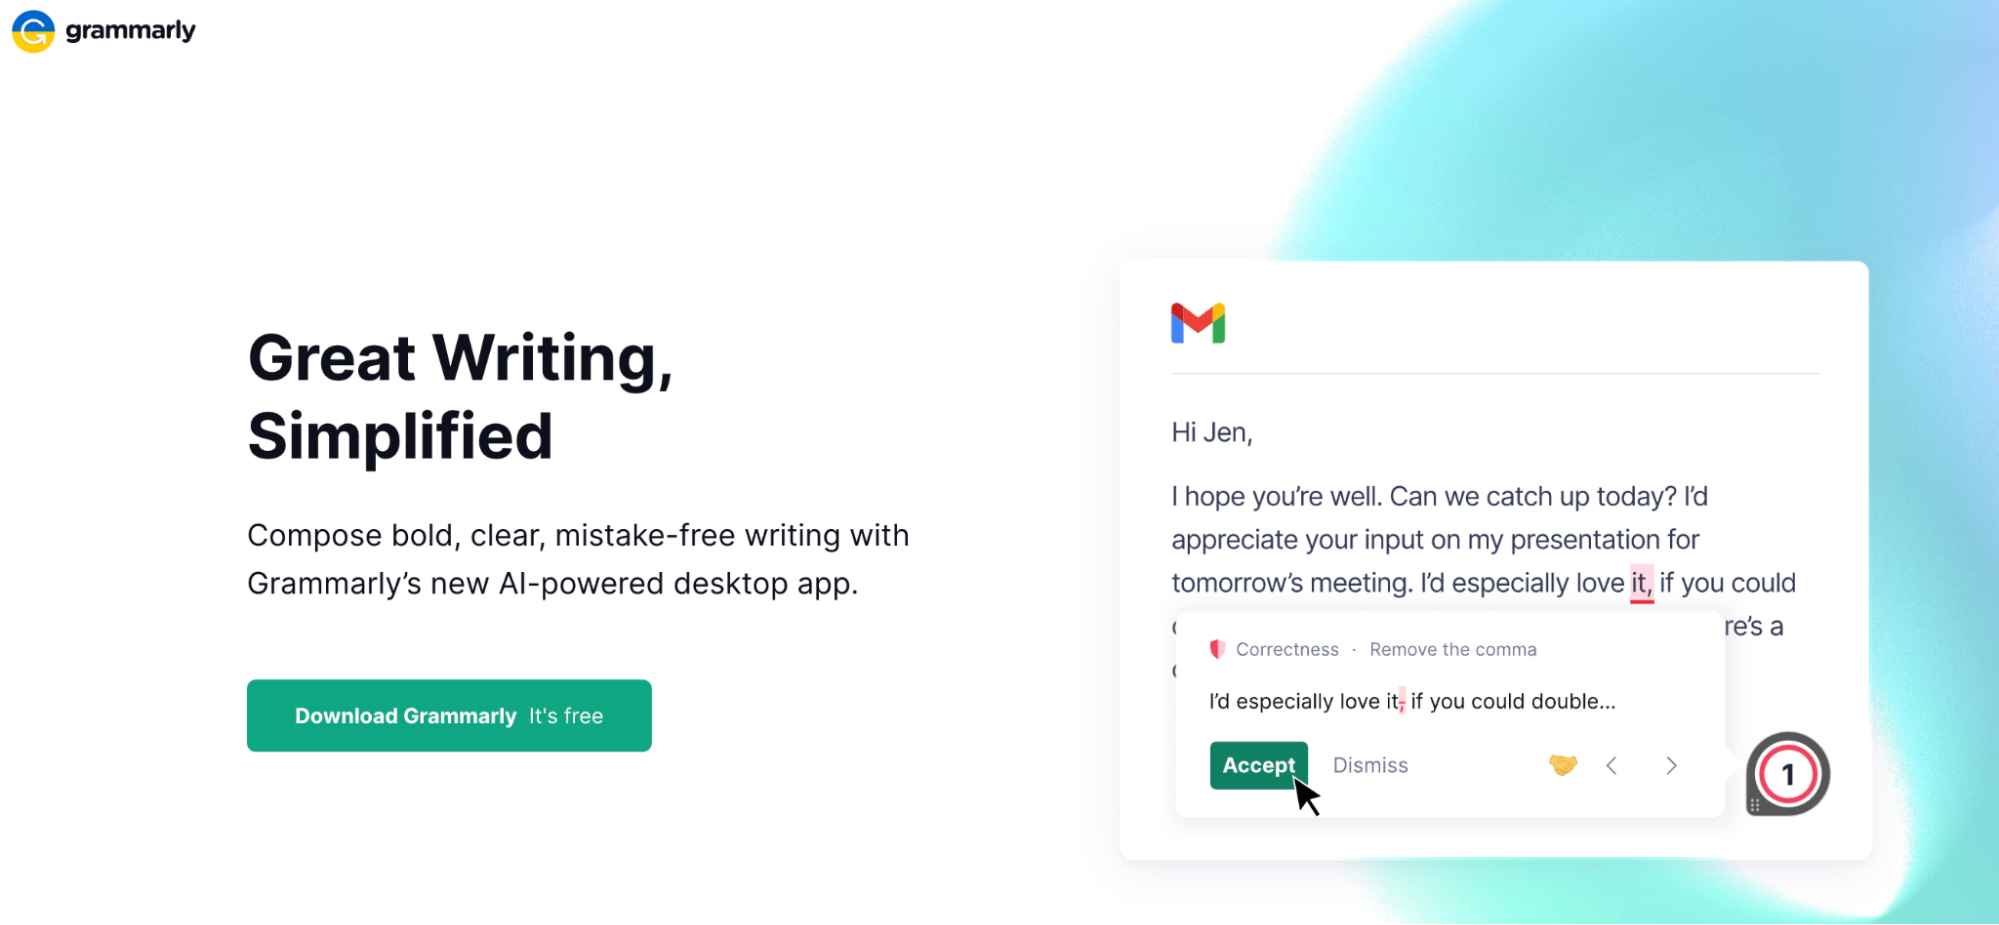 The homepage for Grammarly